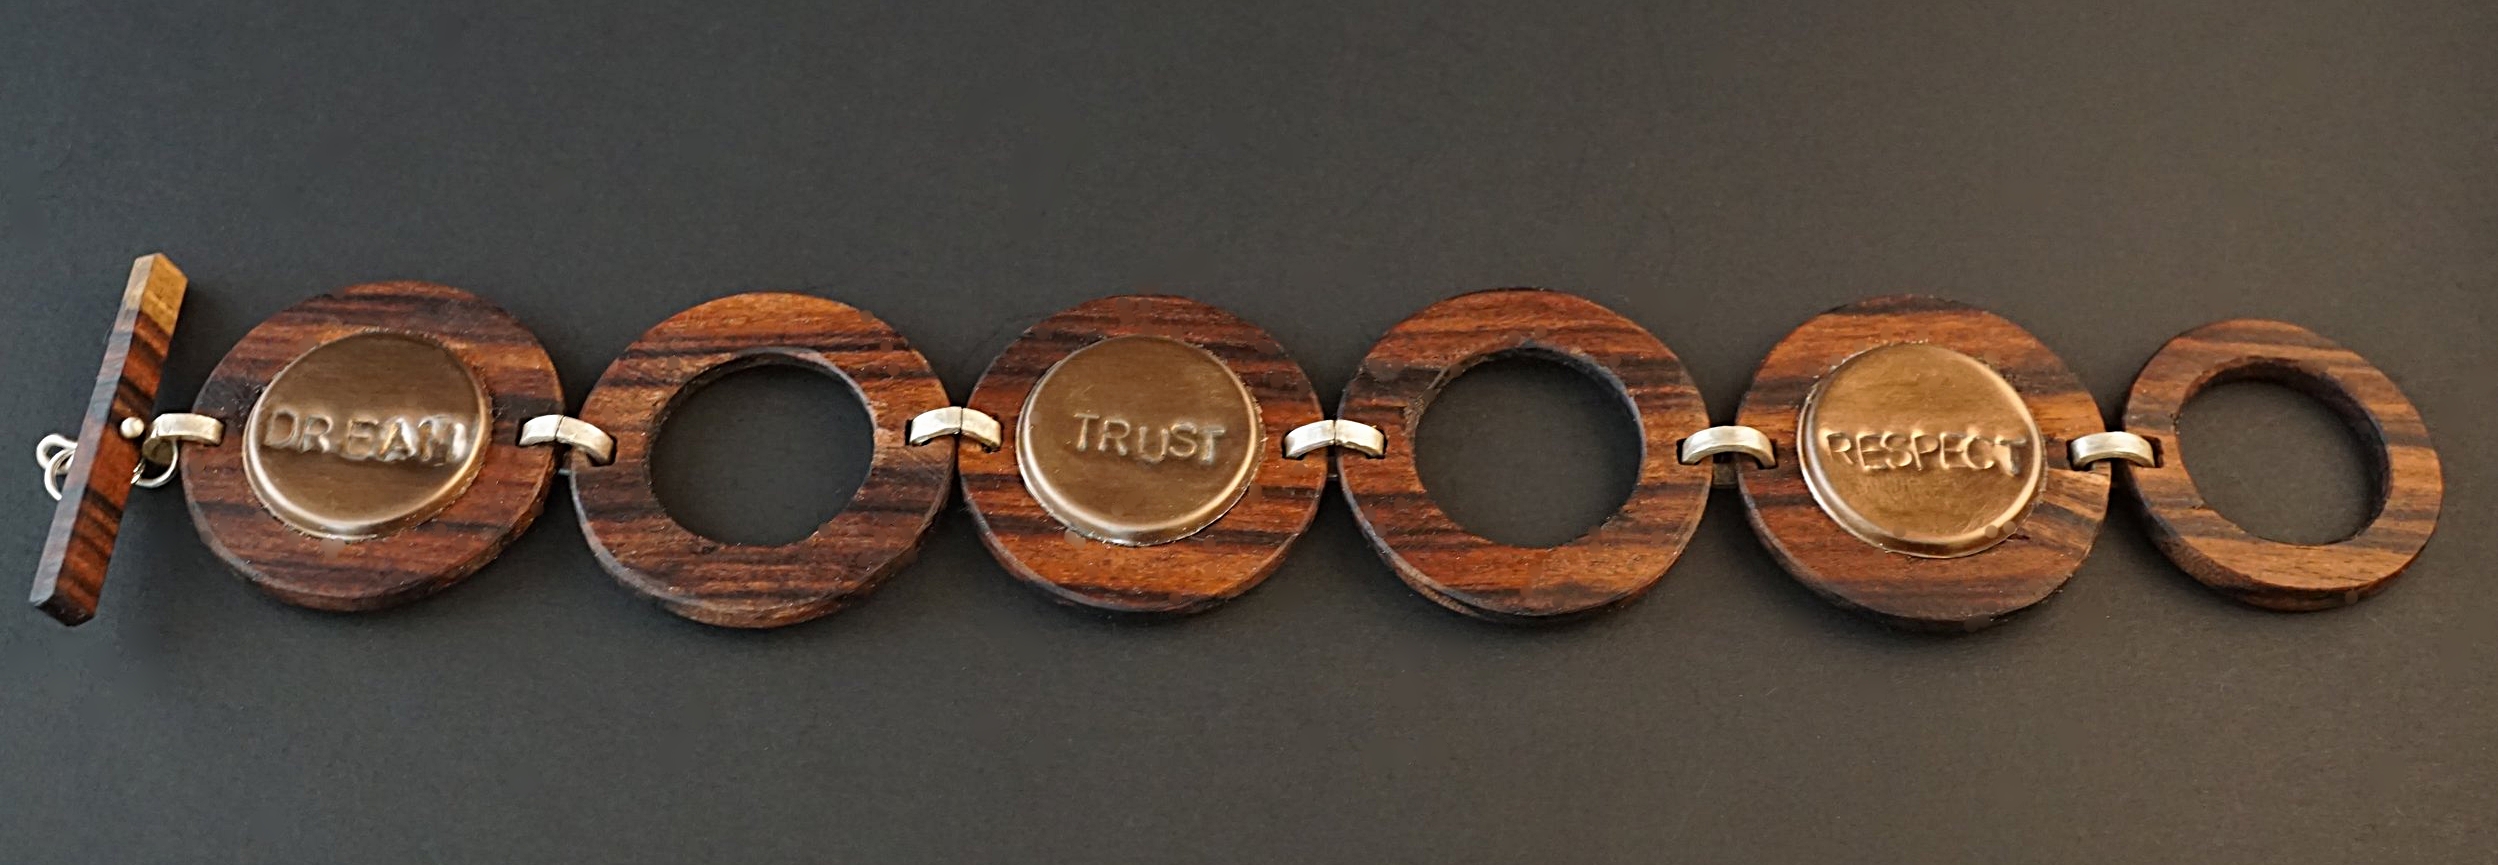 Bolivian Rosewood with hand stamped copper color tiles. Hand stamped with dream, trust, respect, family, faith, create